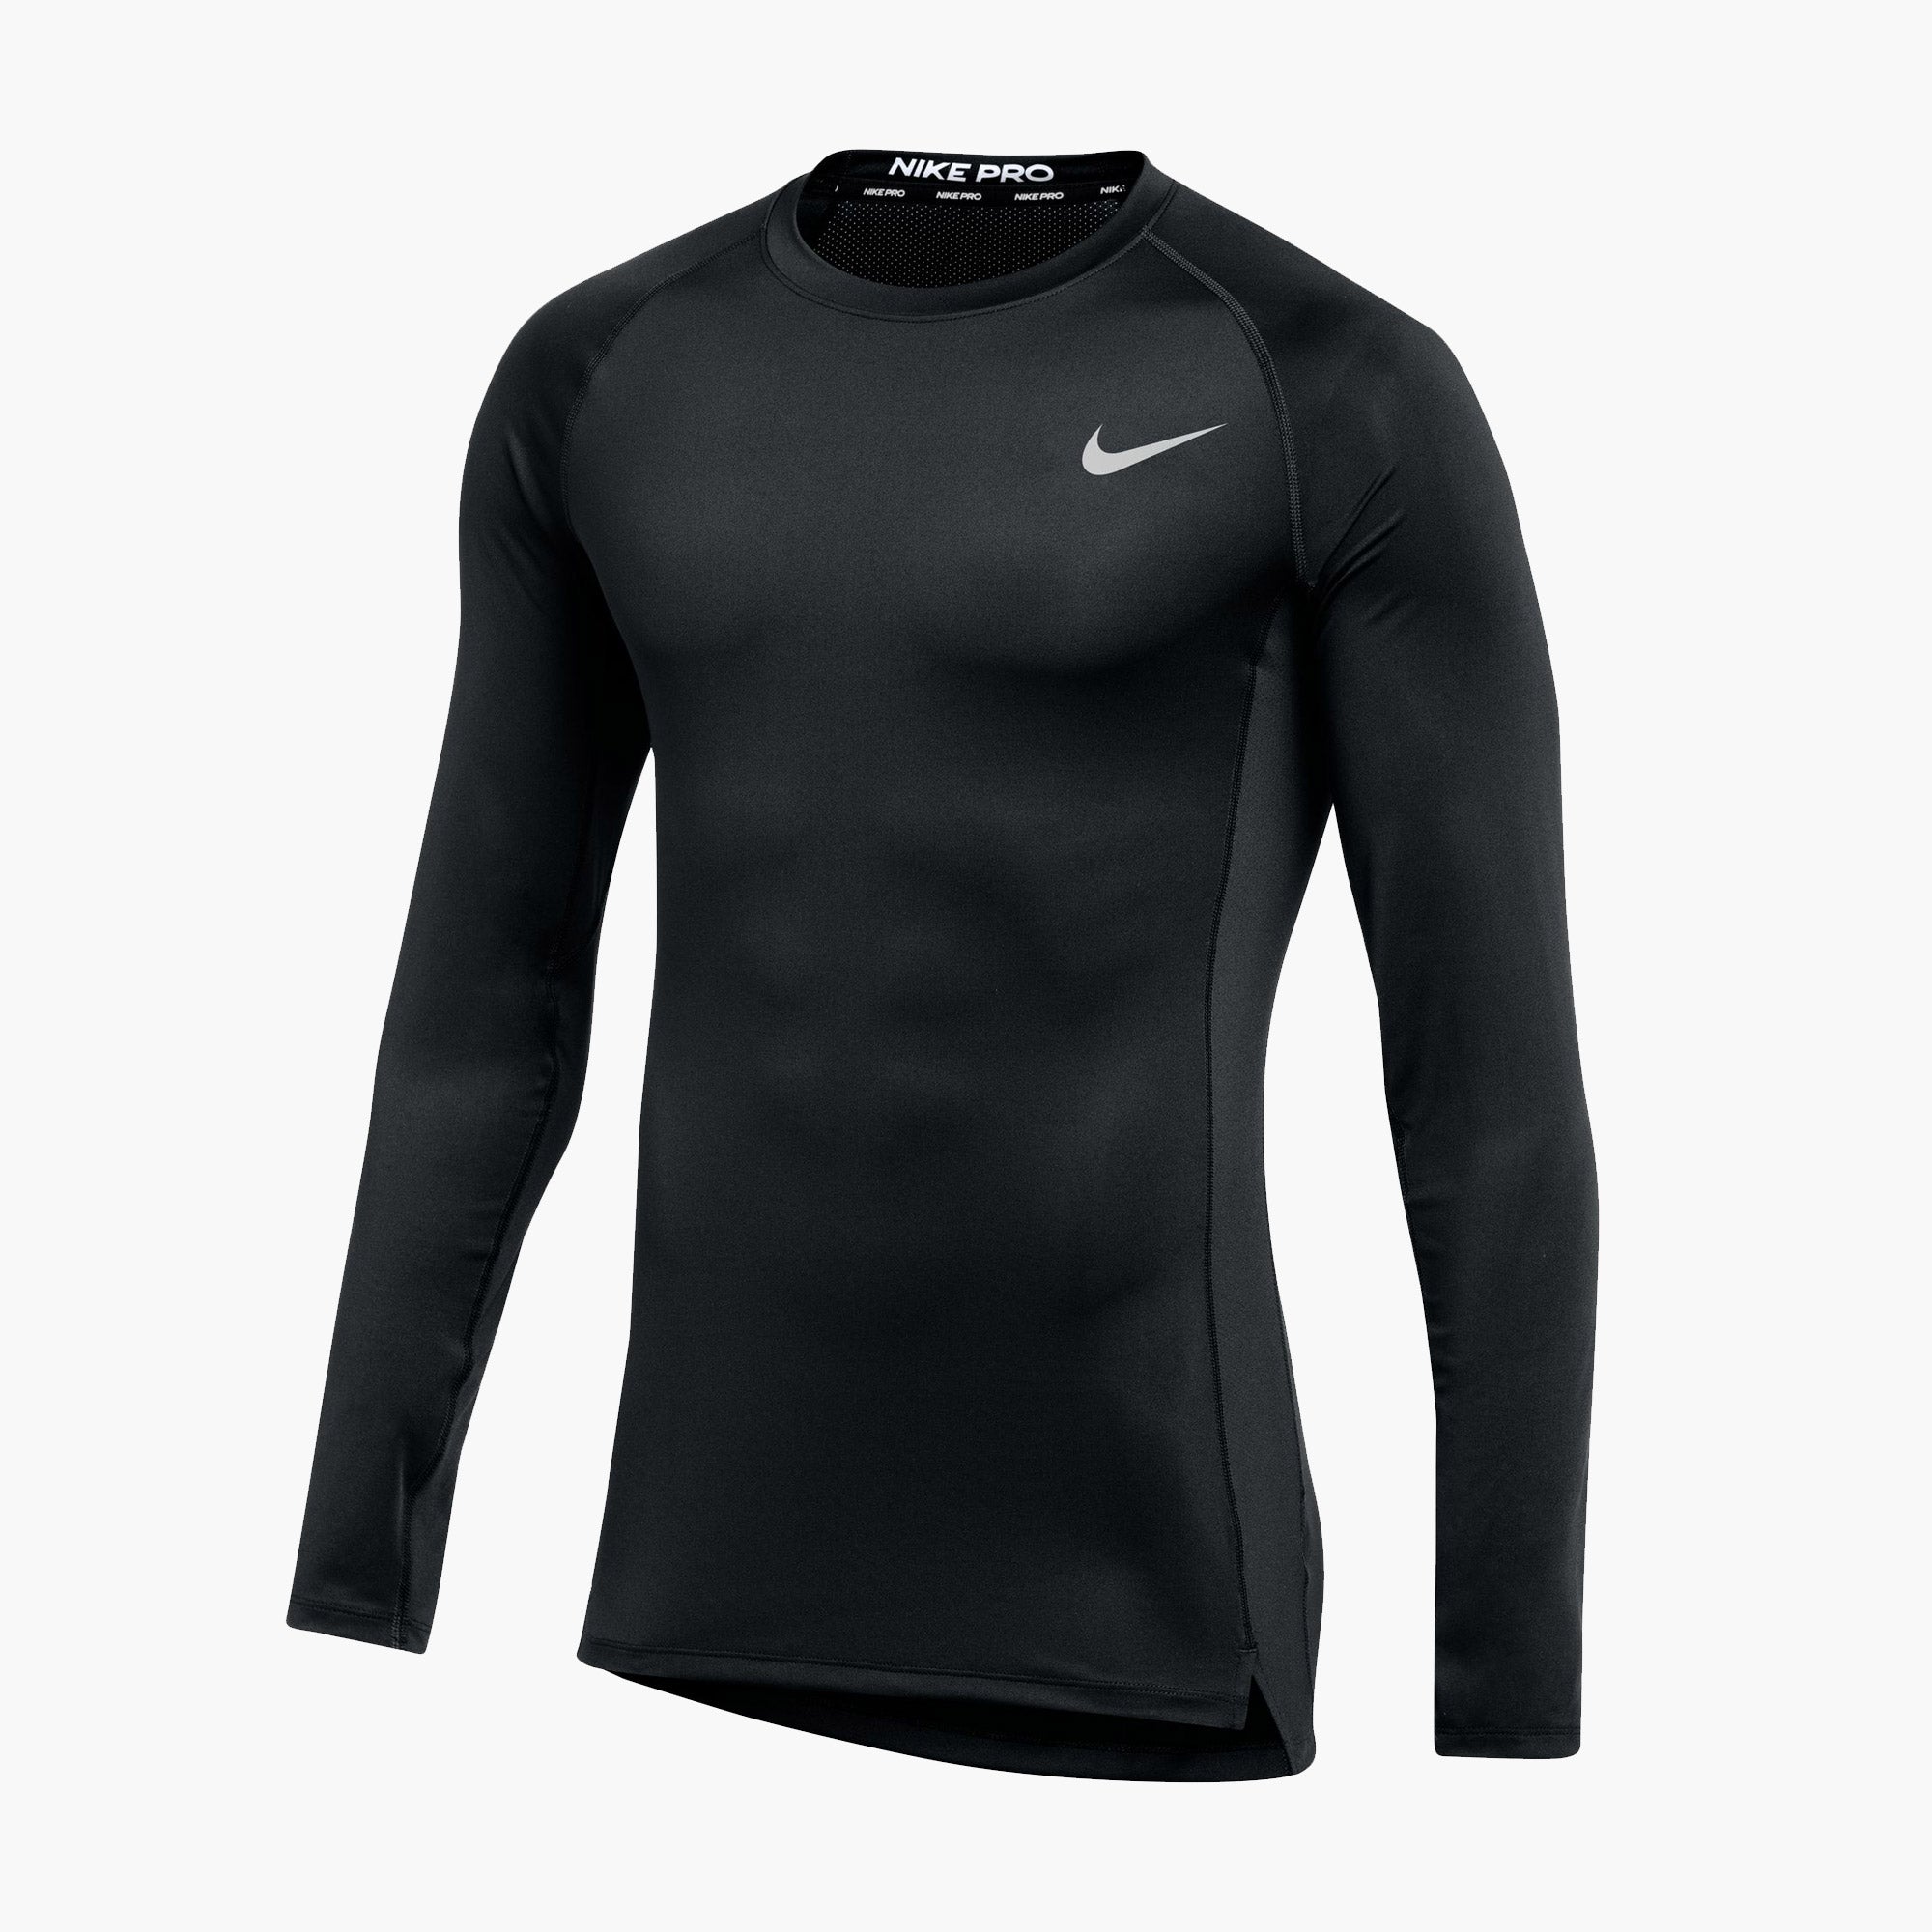 Nike Pro compression black long sleeve shirt in Men's sizes. Available now in all sizes. 